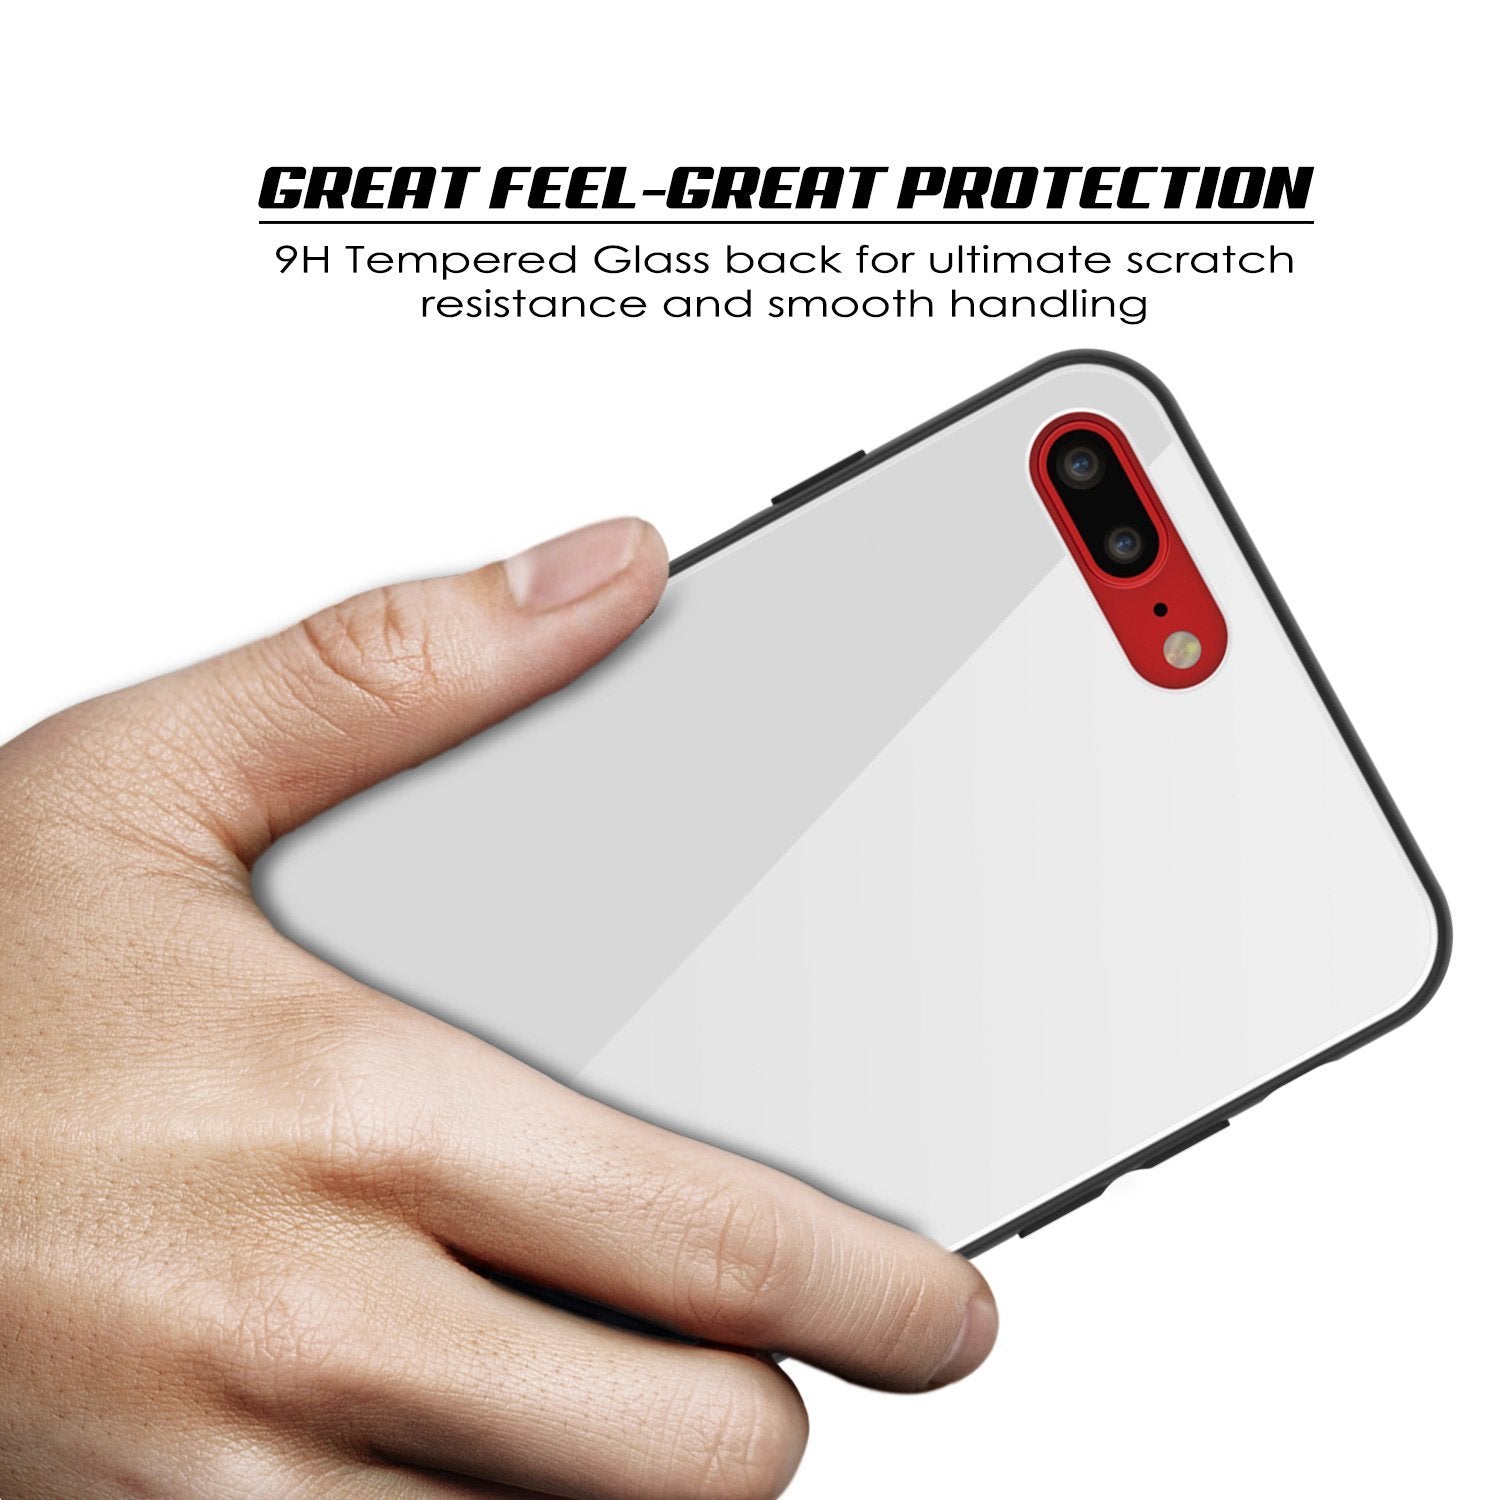 iPhone 8 PLUS Case, Punkcase GlassShield Ultra Thin Protective 9H Full Body Tempered Glass Cover W/ Drop Protection & Non Slip Grip for Apple iPhone 7 PLUS / Apple iPhone 8 PLUS (White) - PunkCase NZ